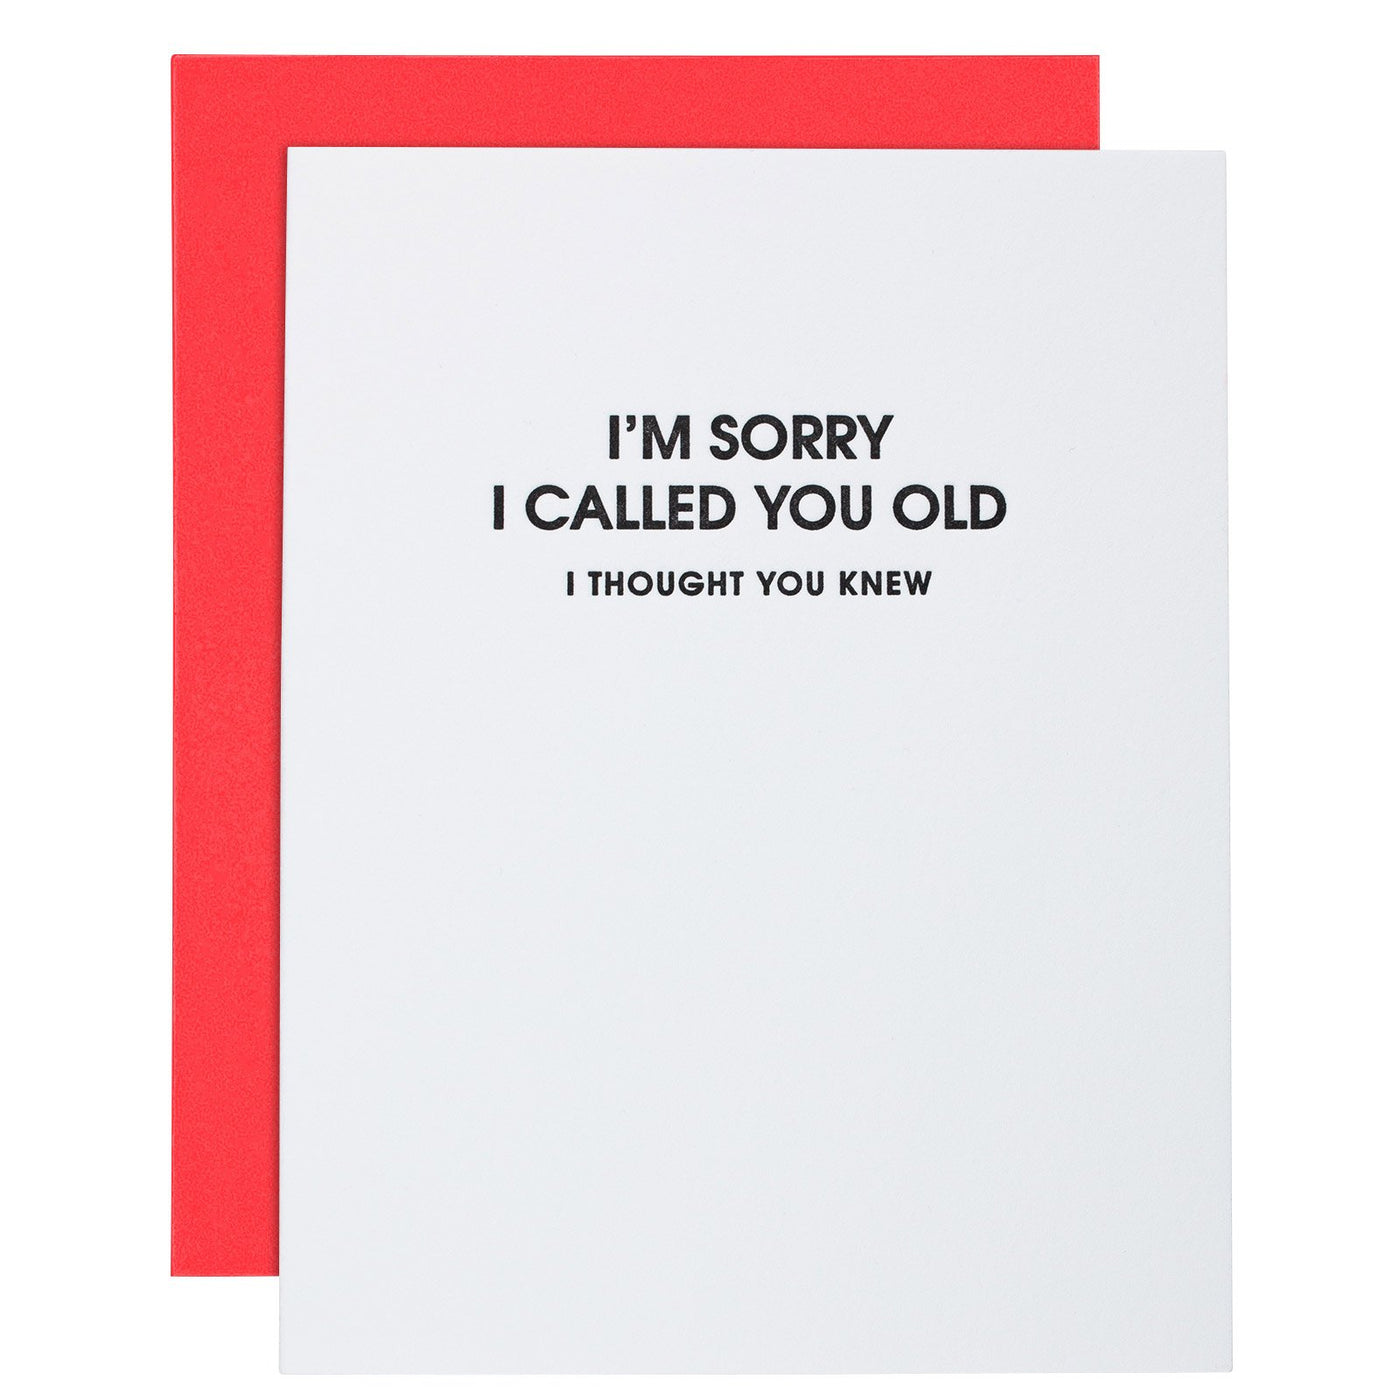 BIRTHDAY GREETING CARD "I'M SORRY I CALLED YOU OLD"